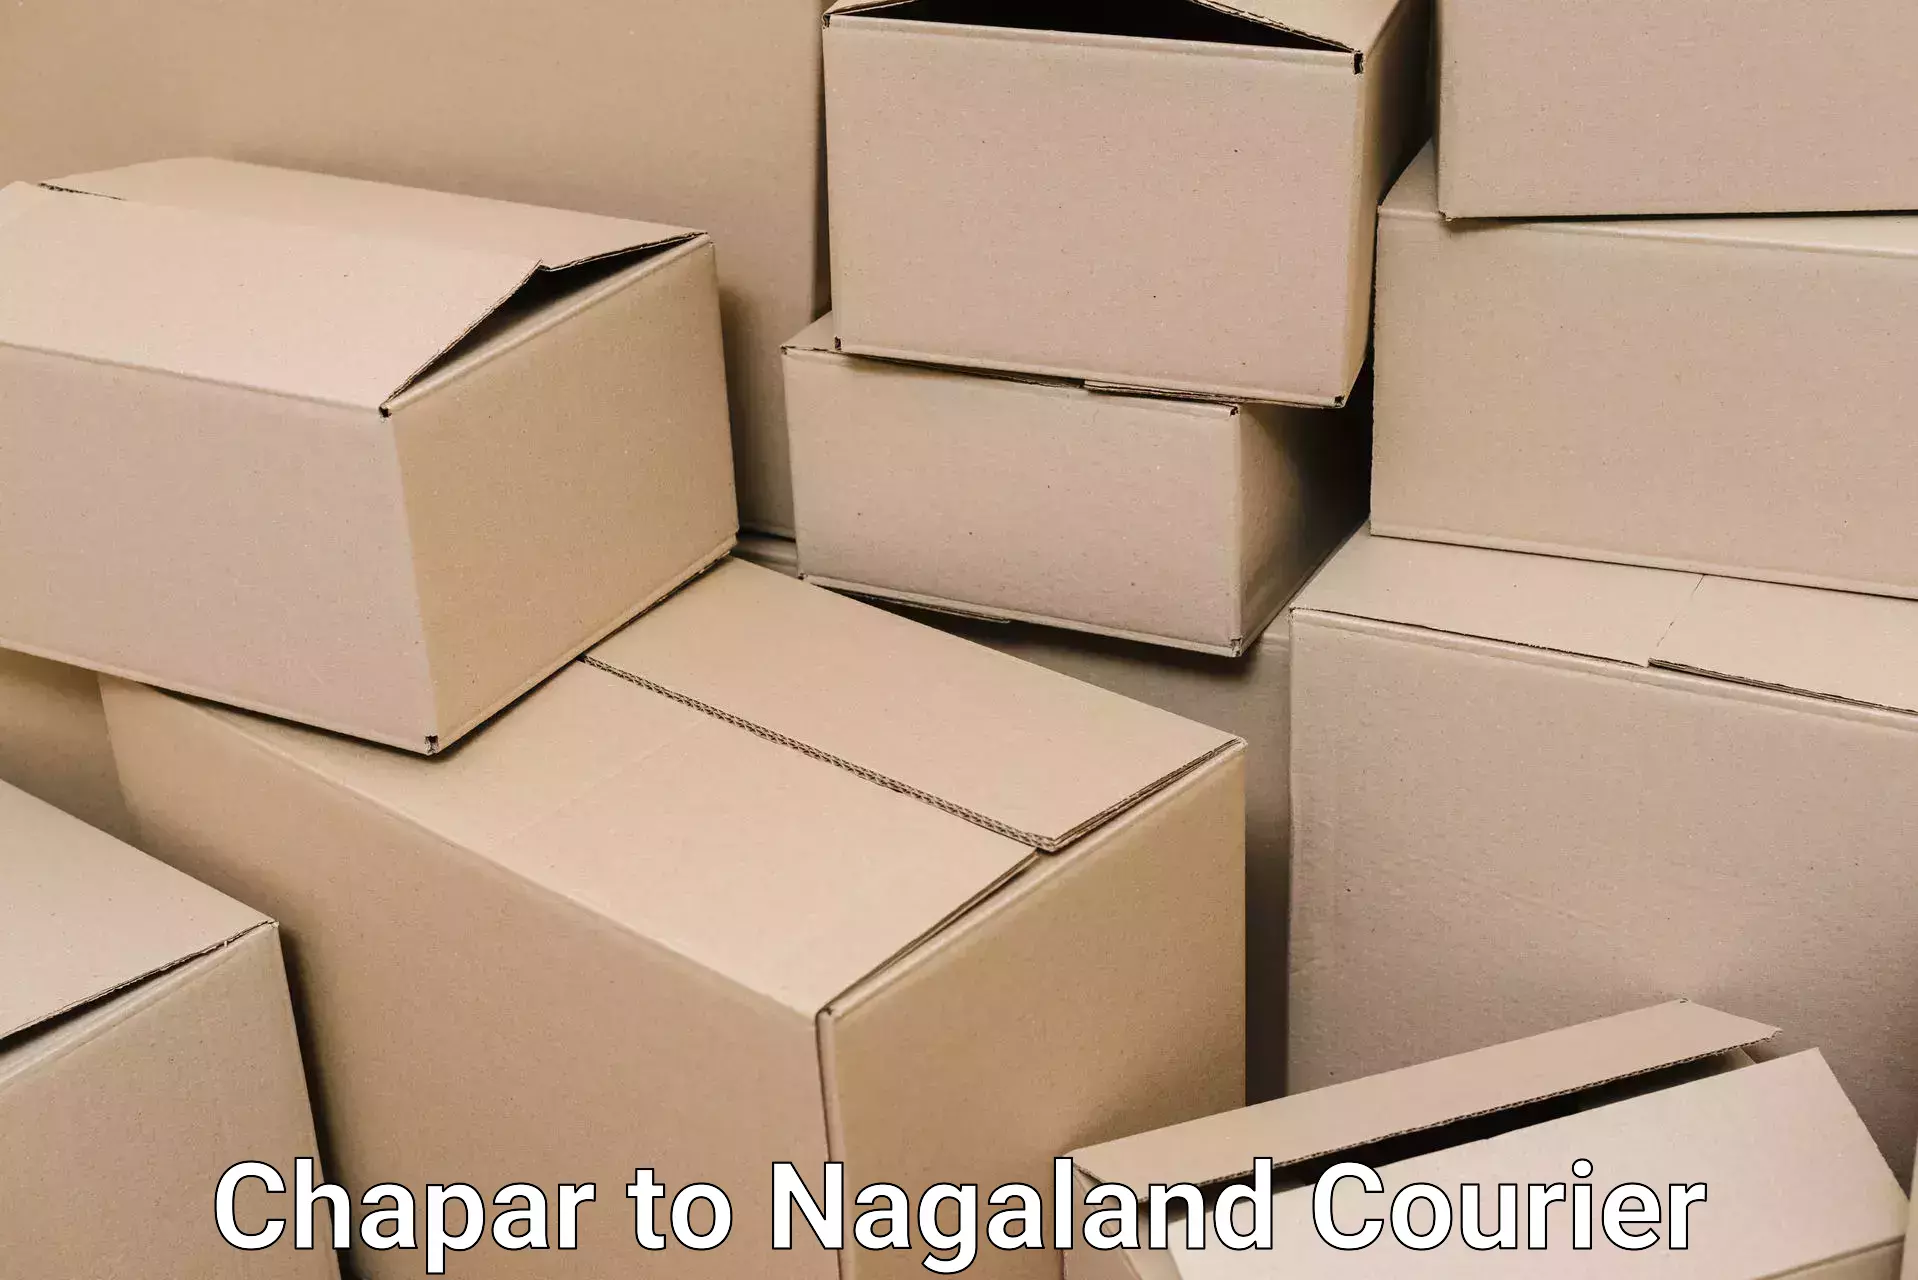 Quality relocation services in Chapar to Nagaland